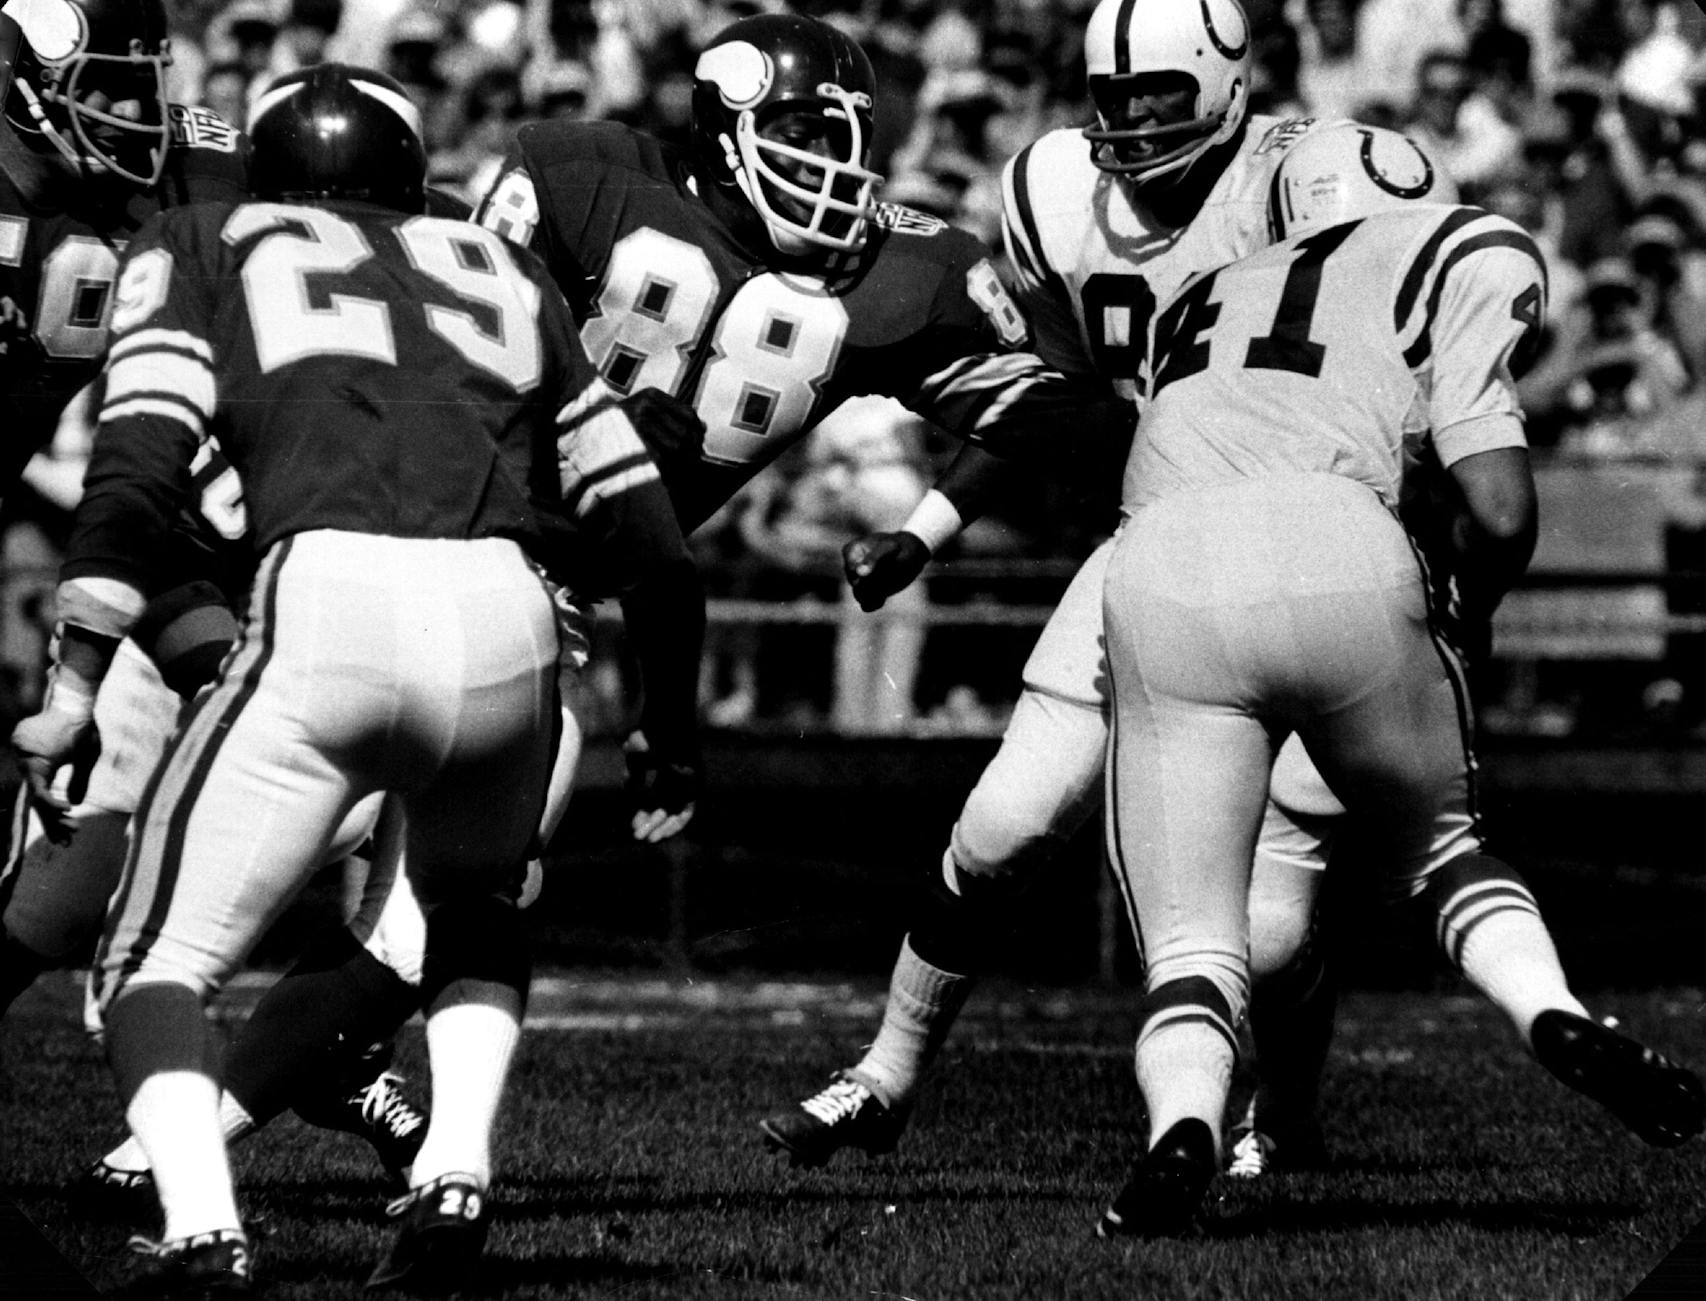 Alan Page was a Hall of Fame defensive tackle and member of the Vikings' vaunted Purple People Eaters' defense.